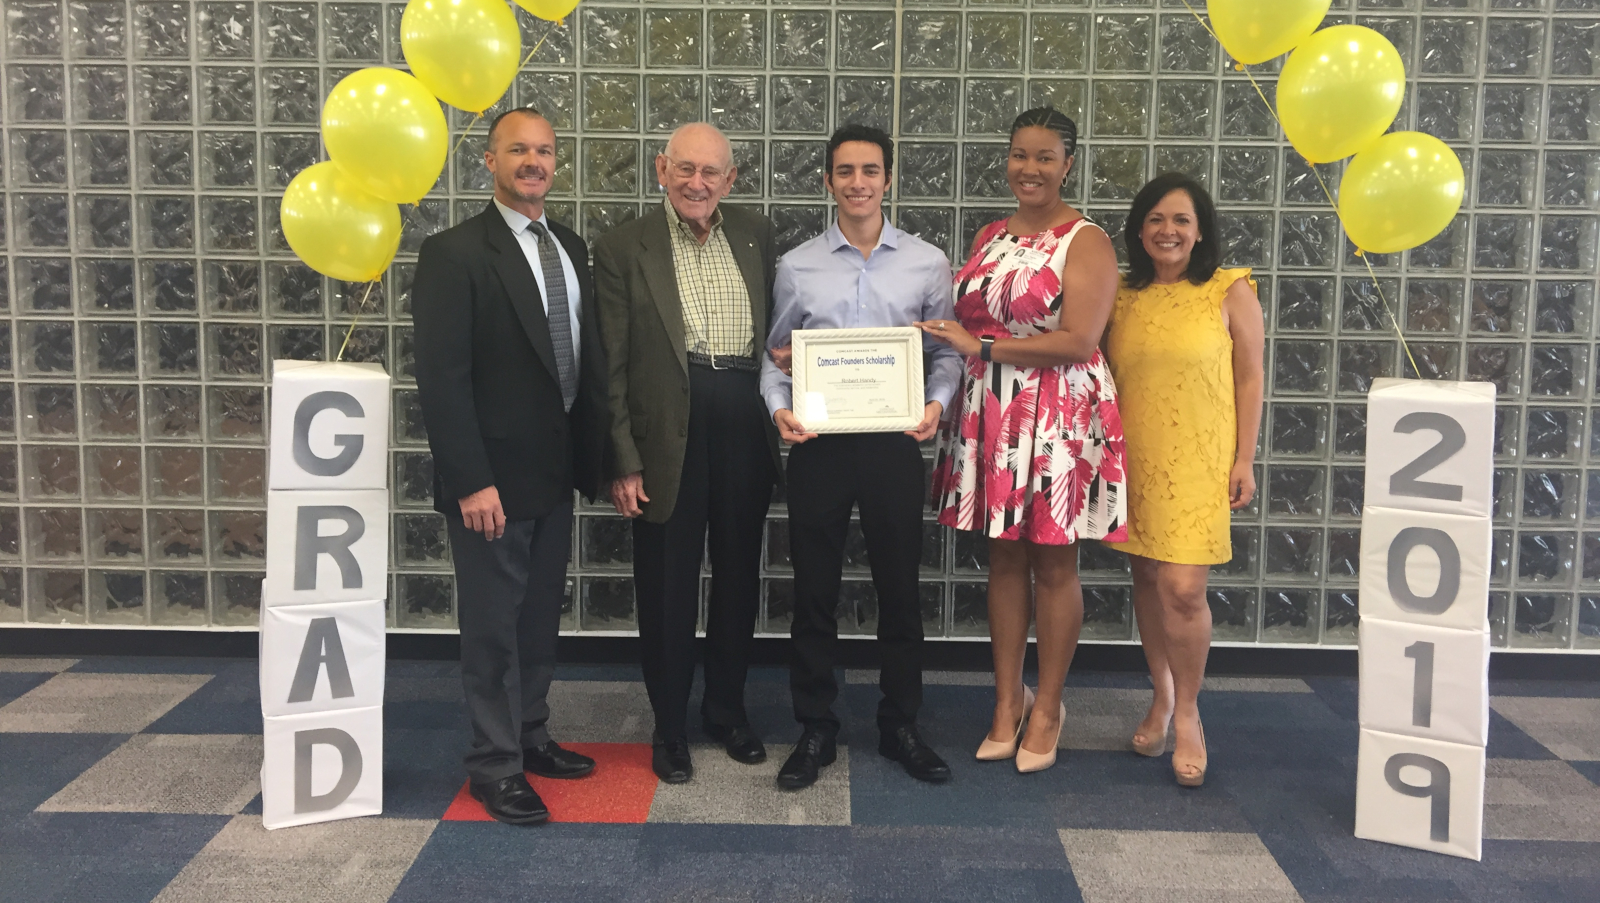 Robert Handy of Miami, Miami-Dade County Public Schools is presented with a scholarship.